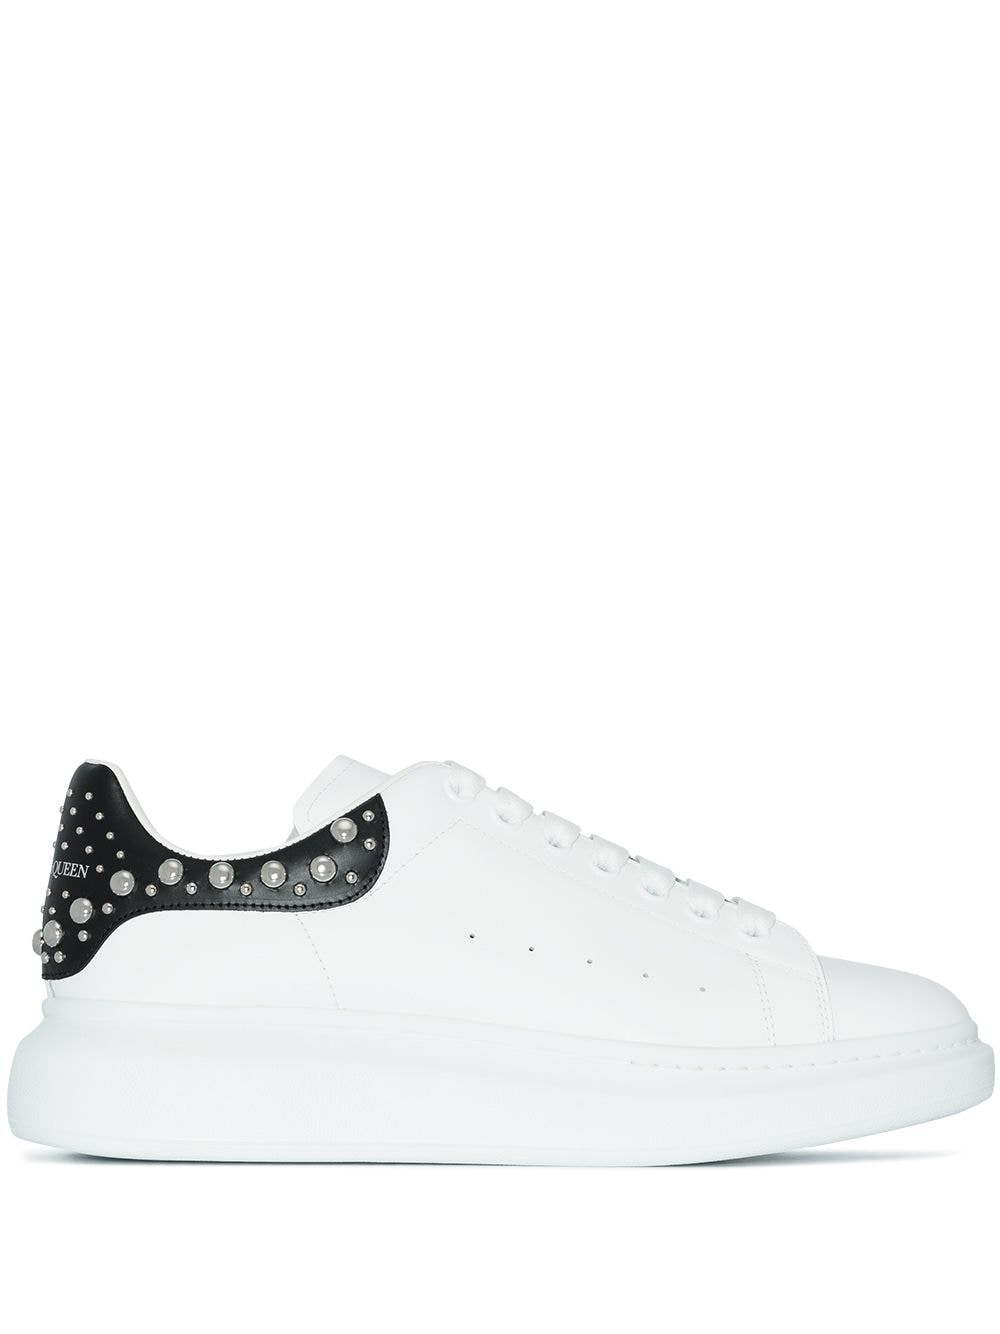 ALEXANDER MCQUEEN Oversized Pearl Embellished Sneakers White